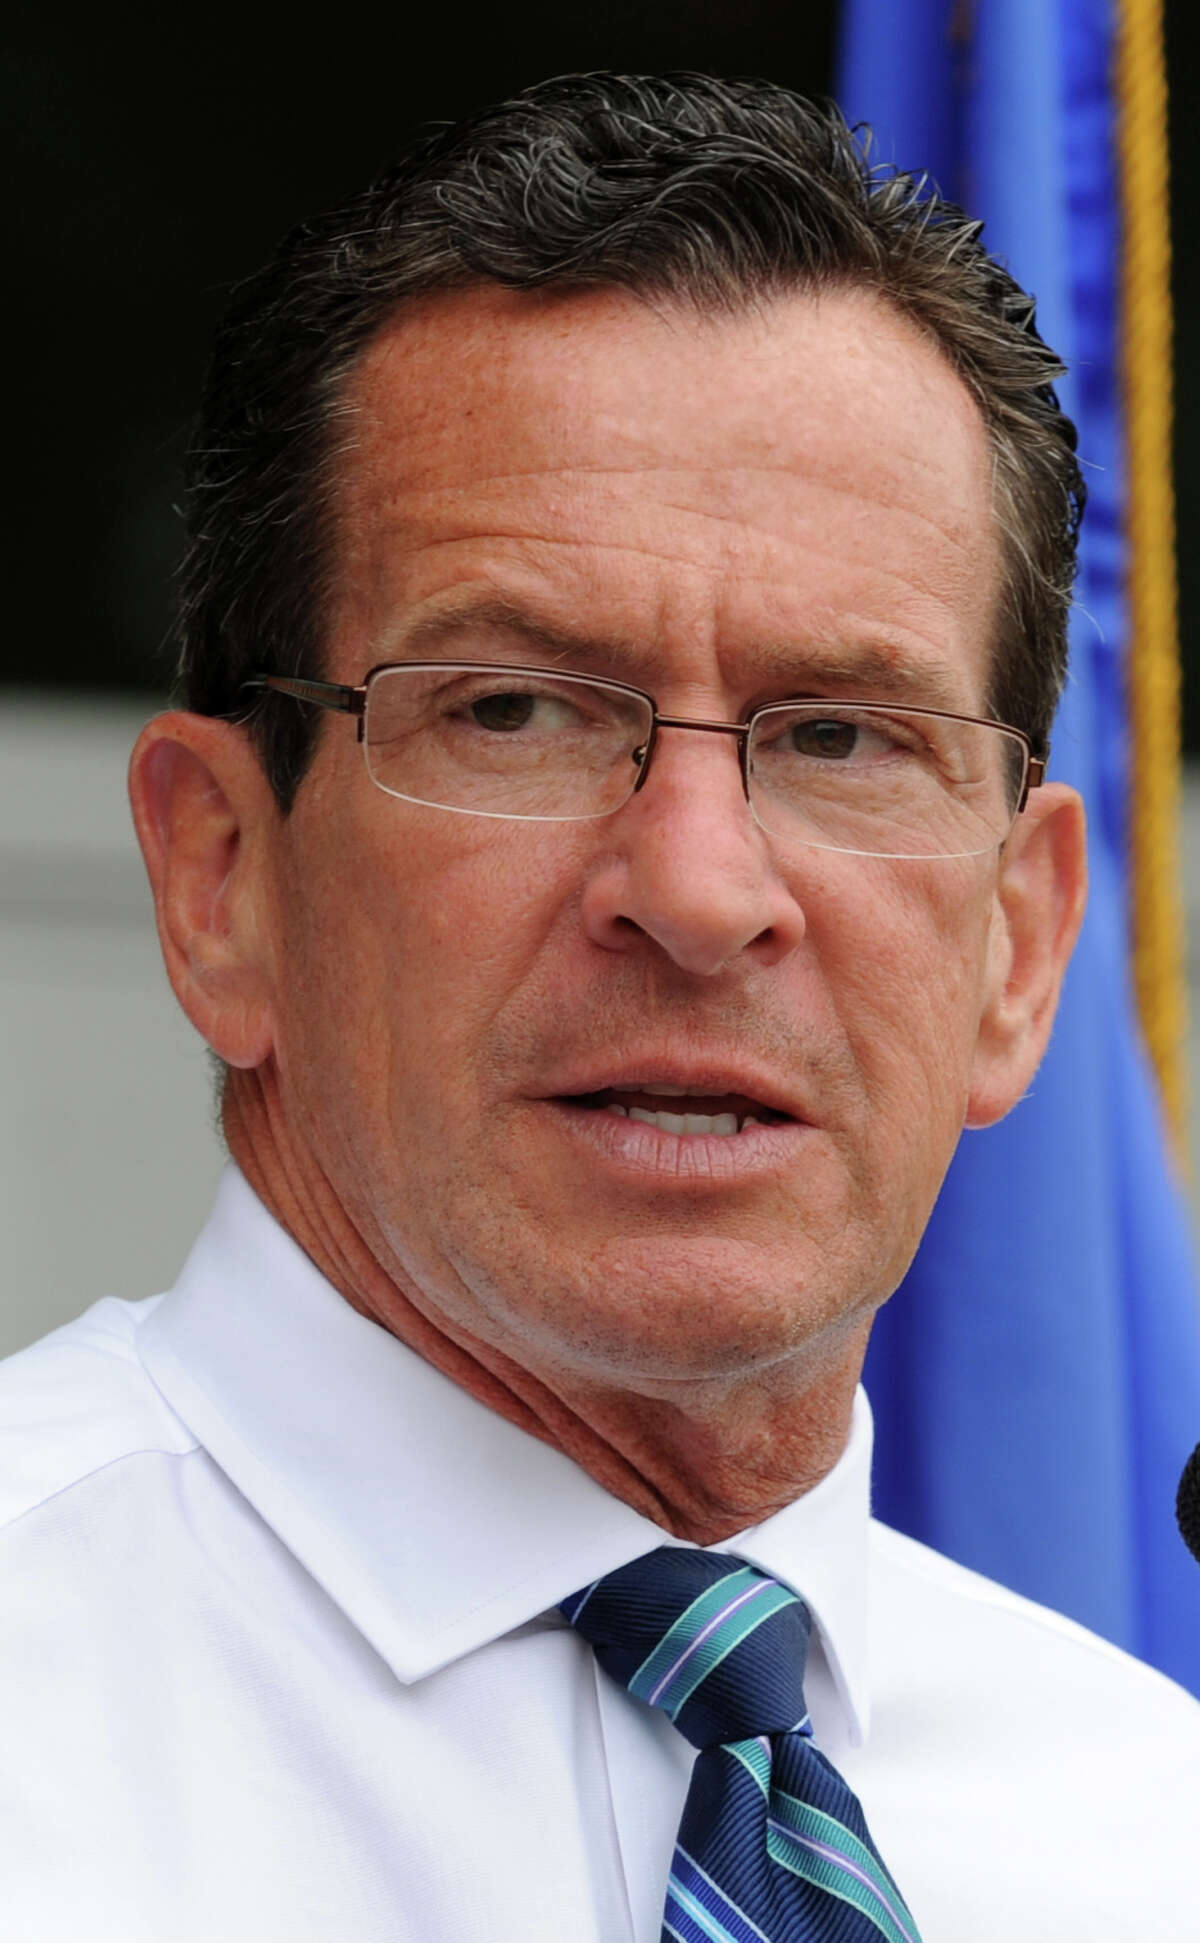 Connecticut Governor Dannel Malloy said that he wants the Newtown shooting report of Stephen J. Sedensky III, state’s attorney for Danbury, to be released within the next week or two to avoid the first anniversary of the murders at Sandy Hook Elementary School.